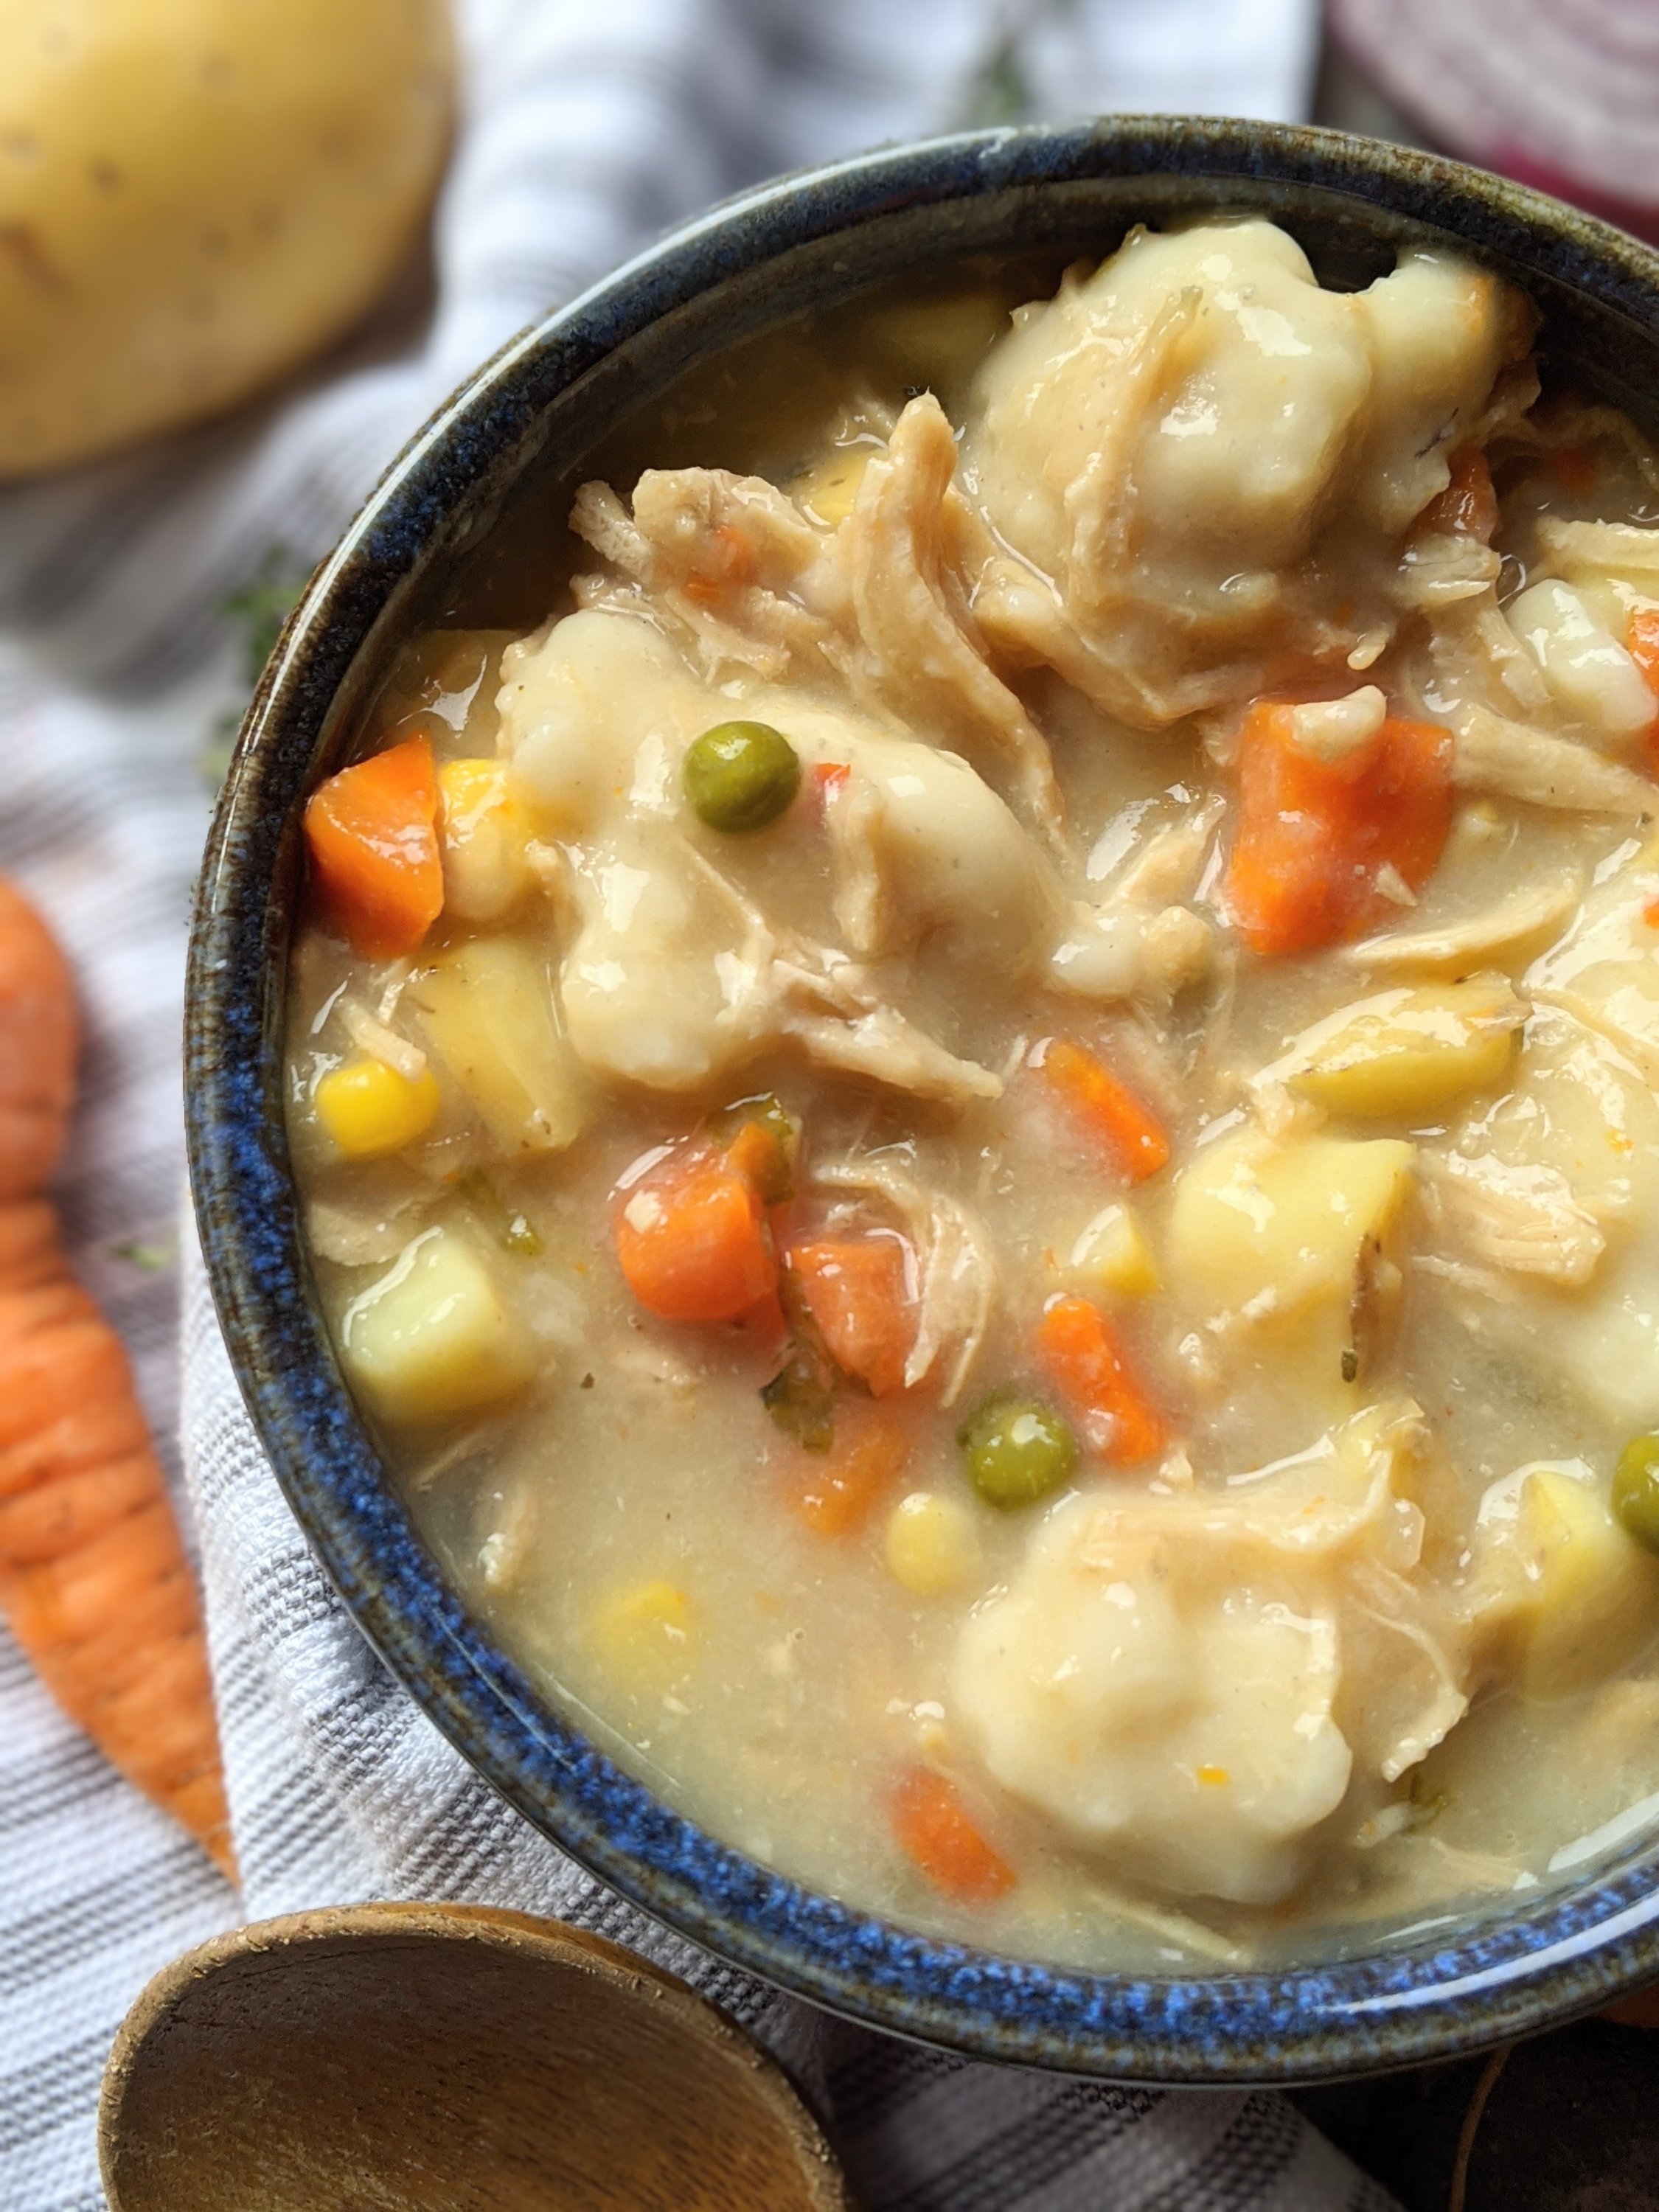 creamy chicken and dumplings soup healthy dairy free no milk gluten free option thanksgiving leftovers recipe